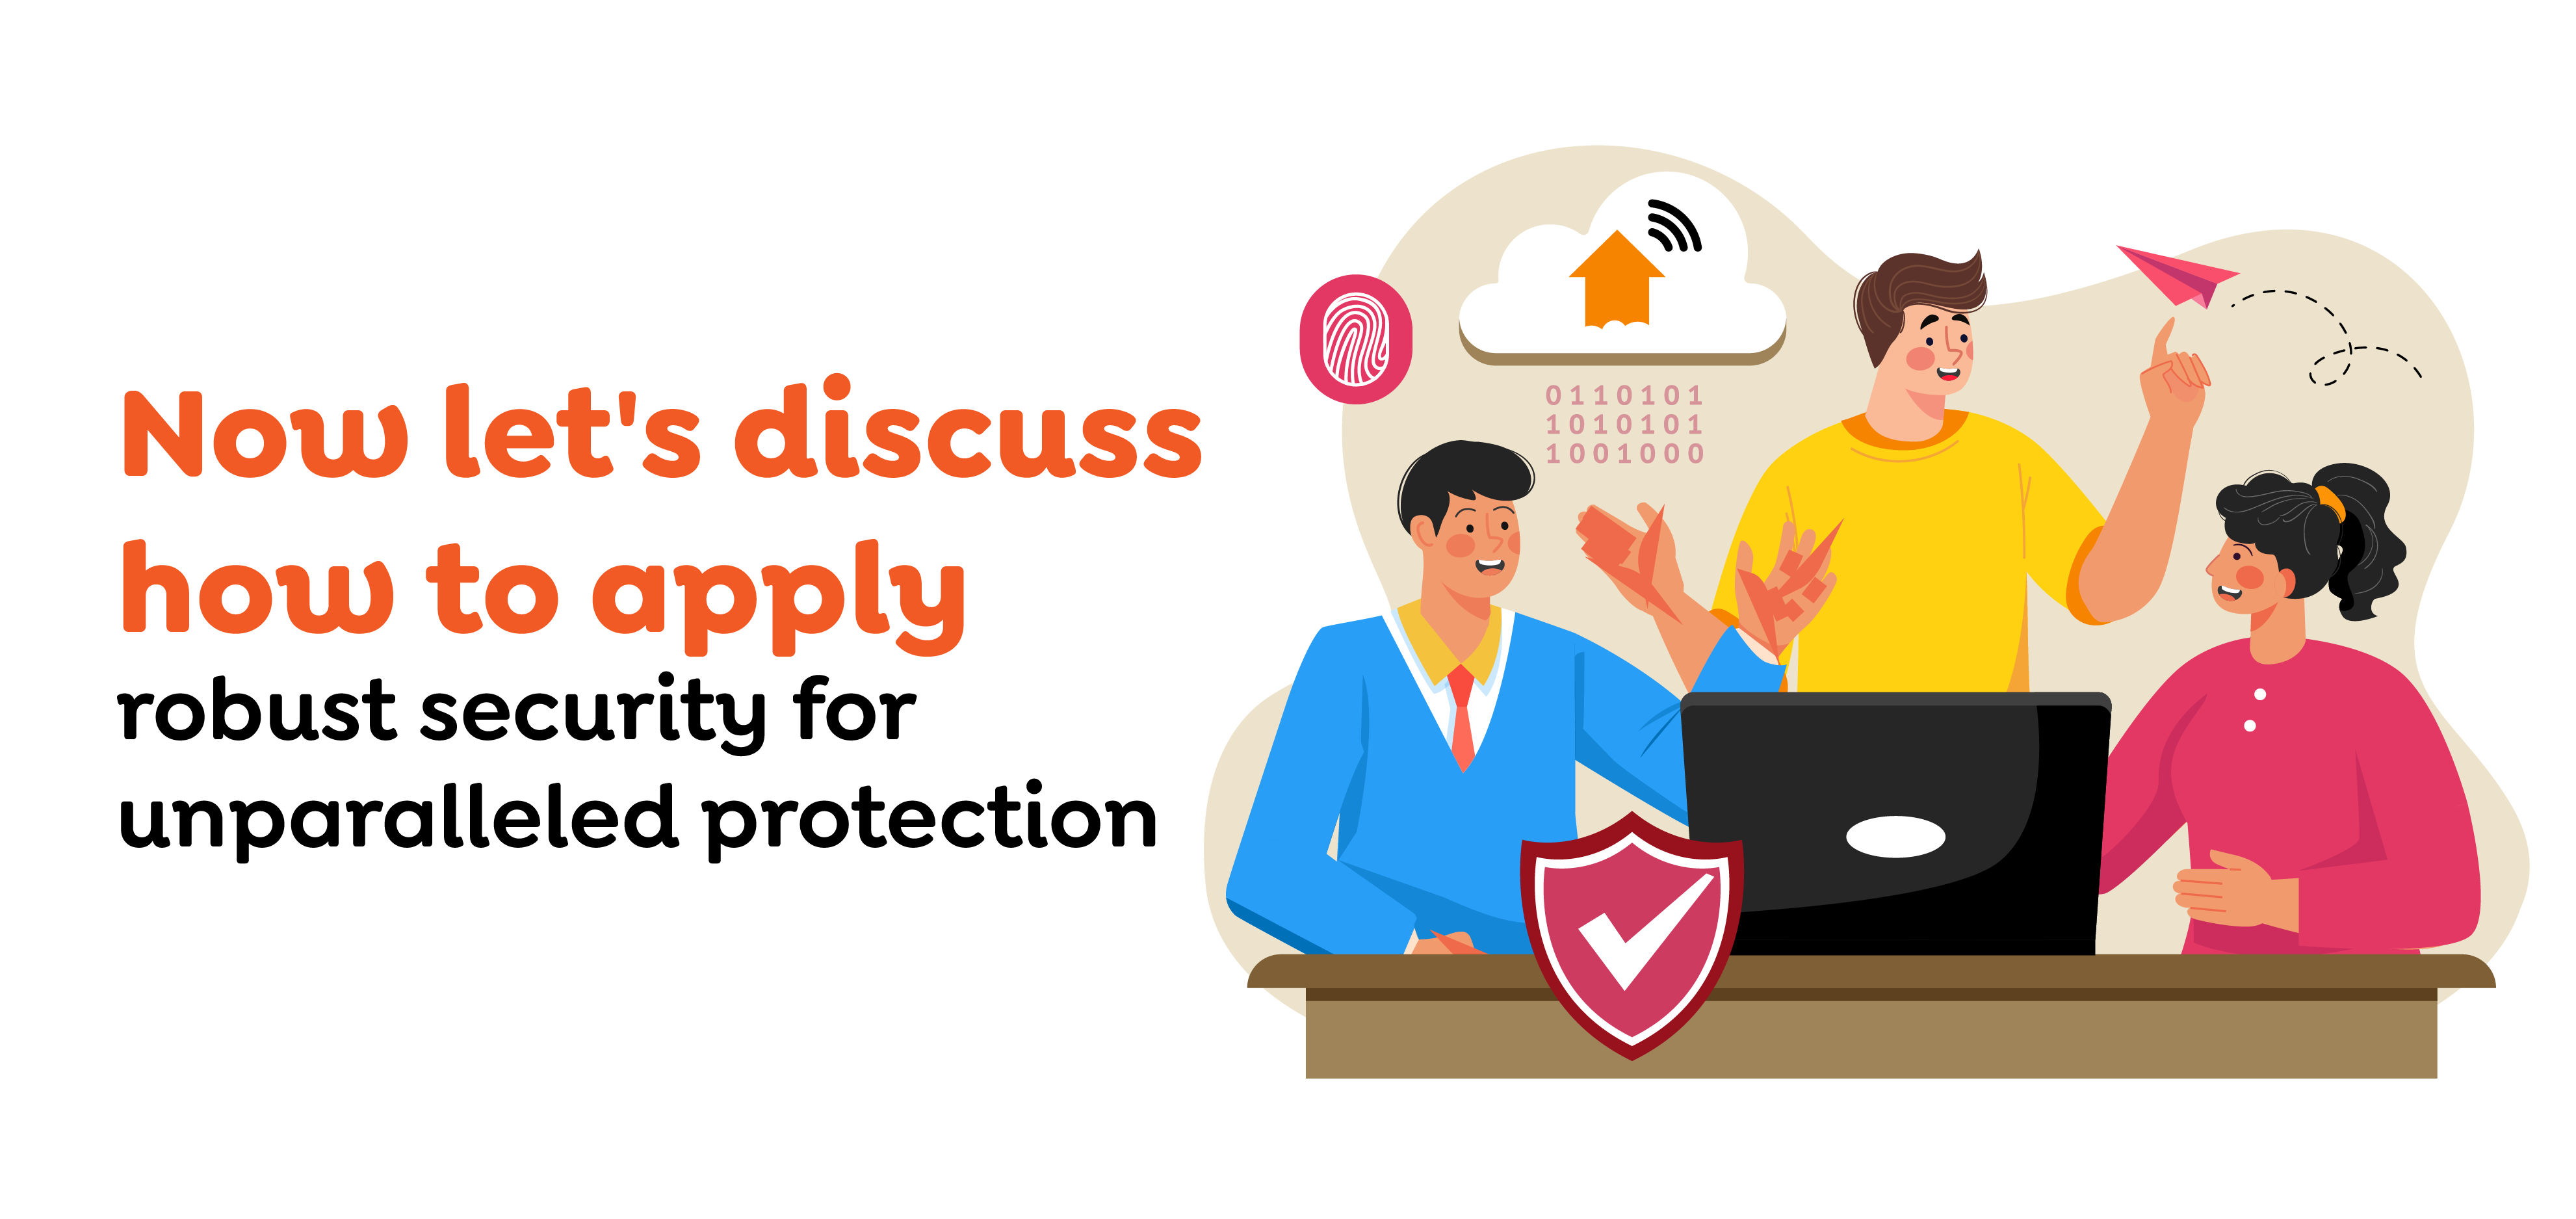 Now let's discuss how to apply robust security for unparalleled protection